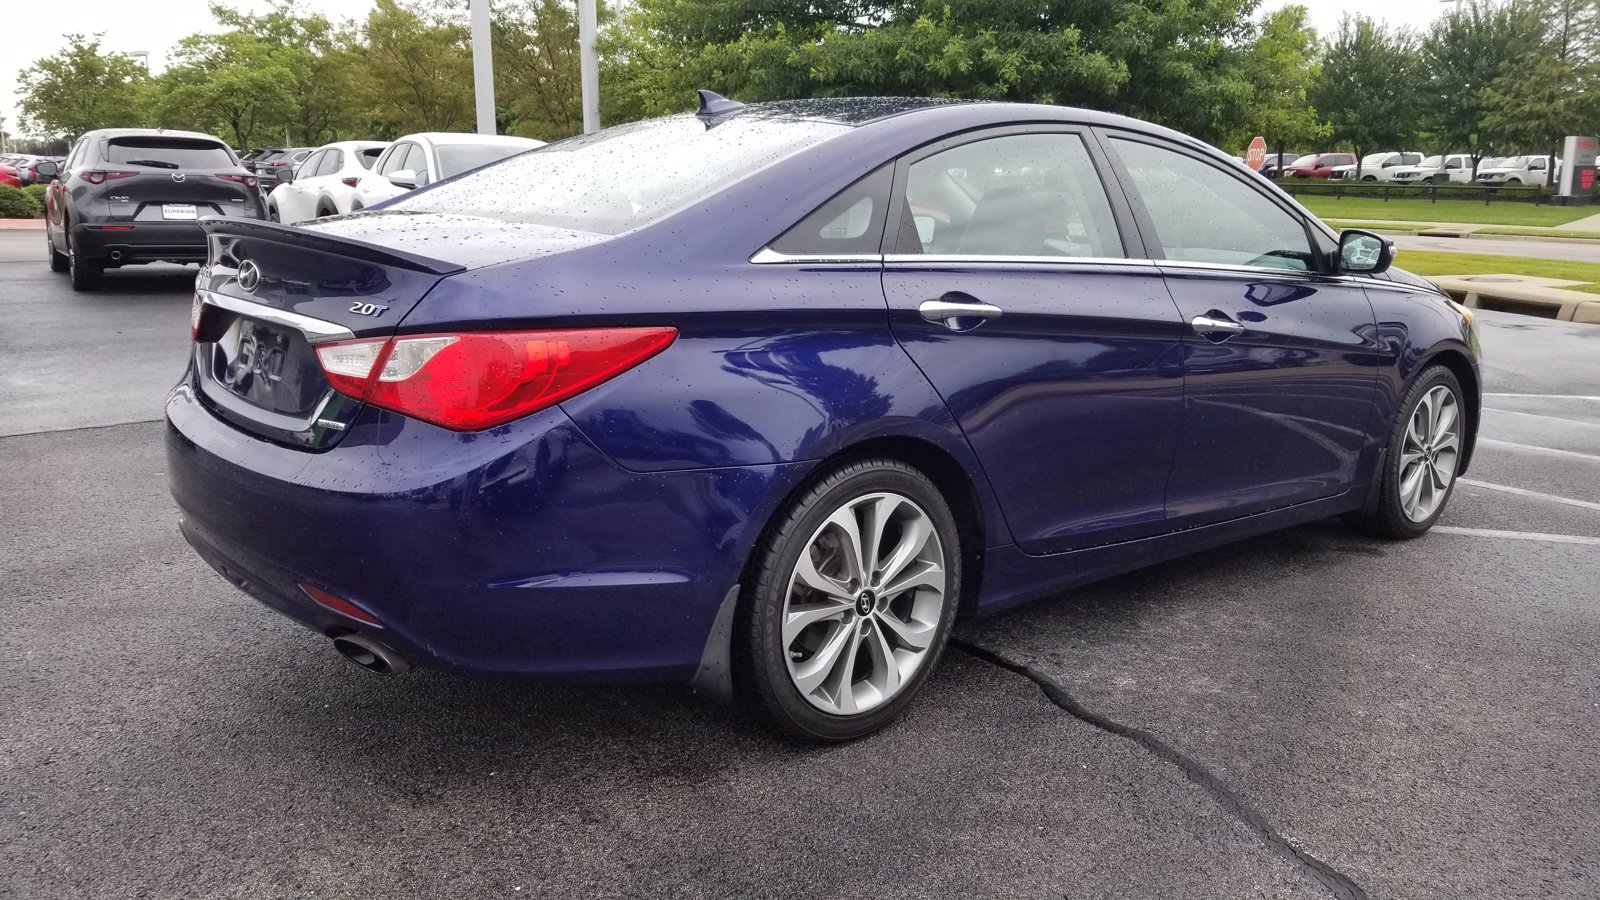 Pre-Owned 2013 Hyundai Sonata Limited 4dr Car in Fayetteville #Z817580A ...